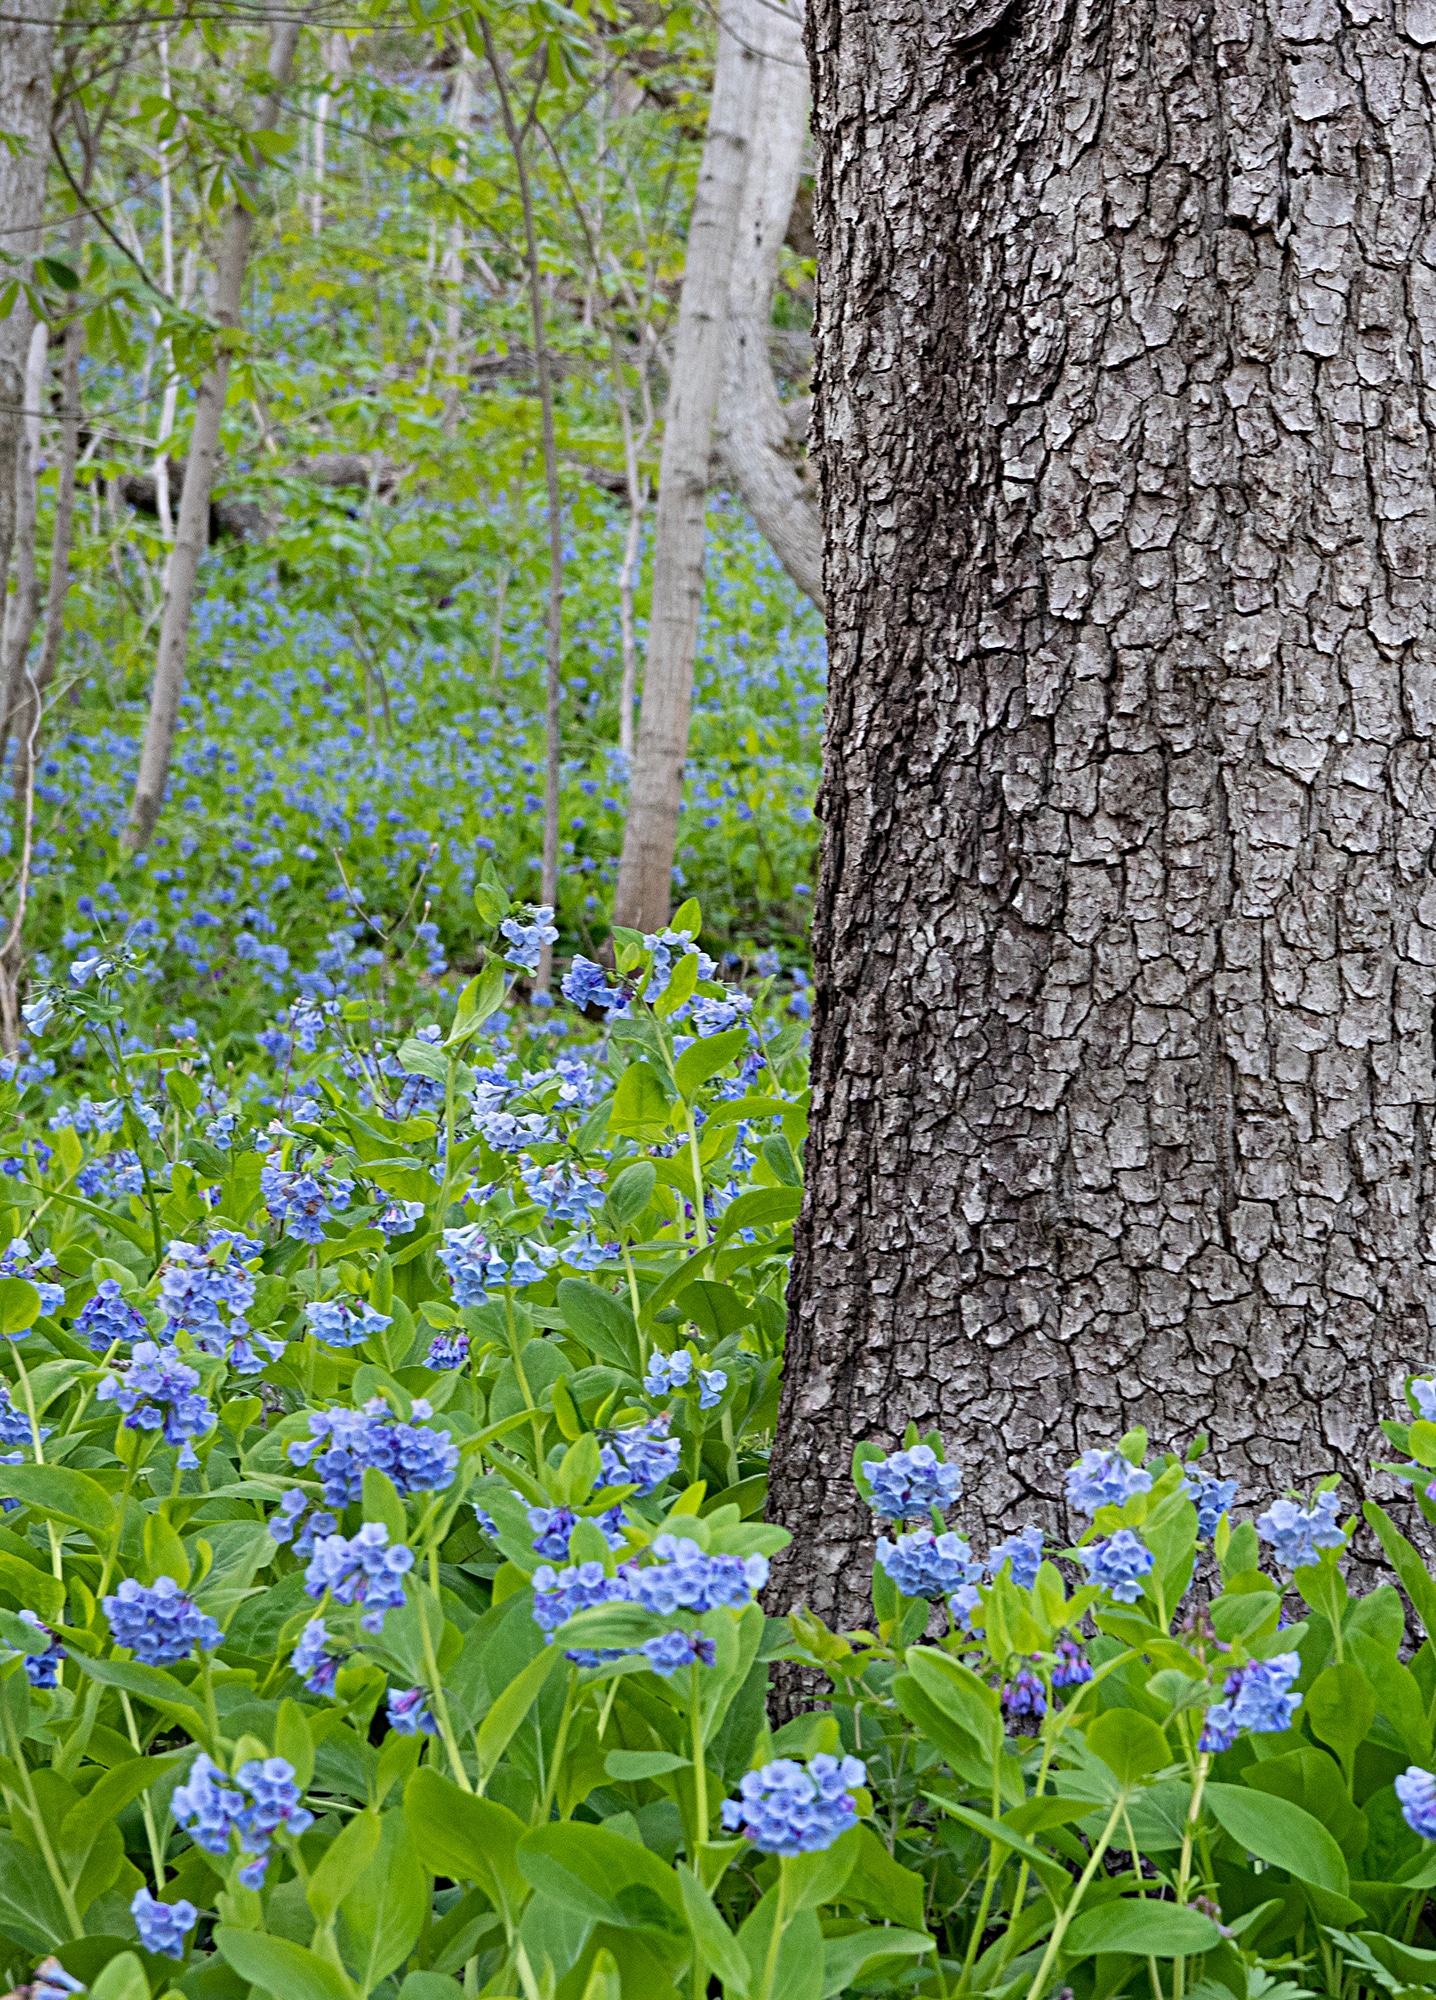 vertical photo showing a large tree trunk on the right, surrounded by Virginia Bluebells. There are more, smaller tree trunks and more bluebells in the background